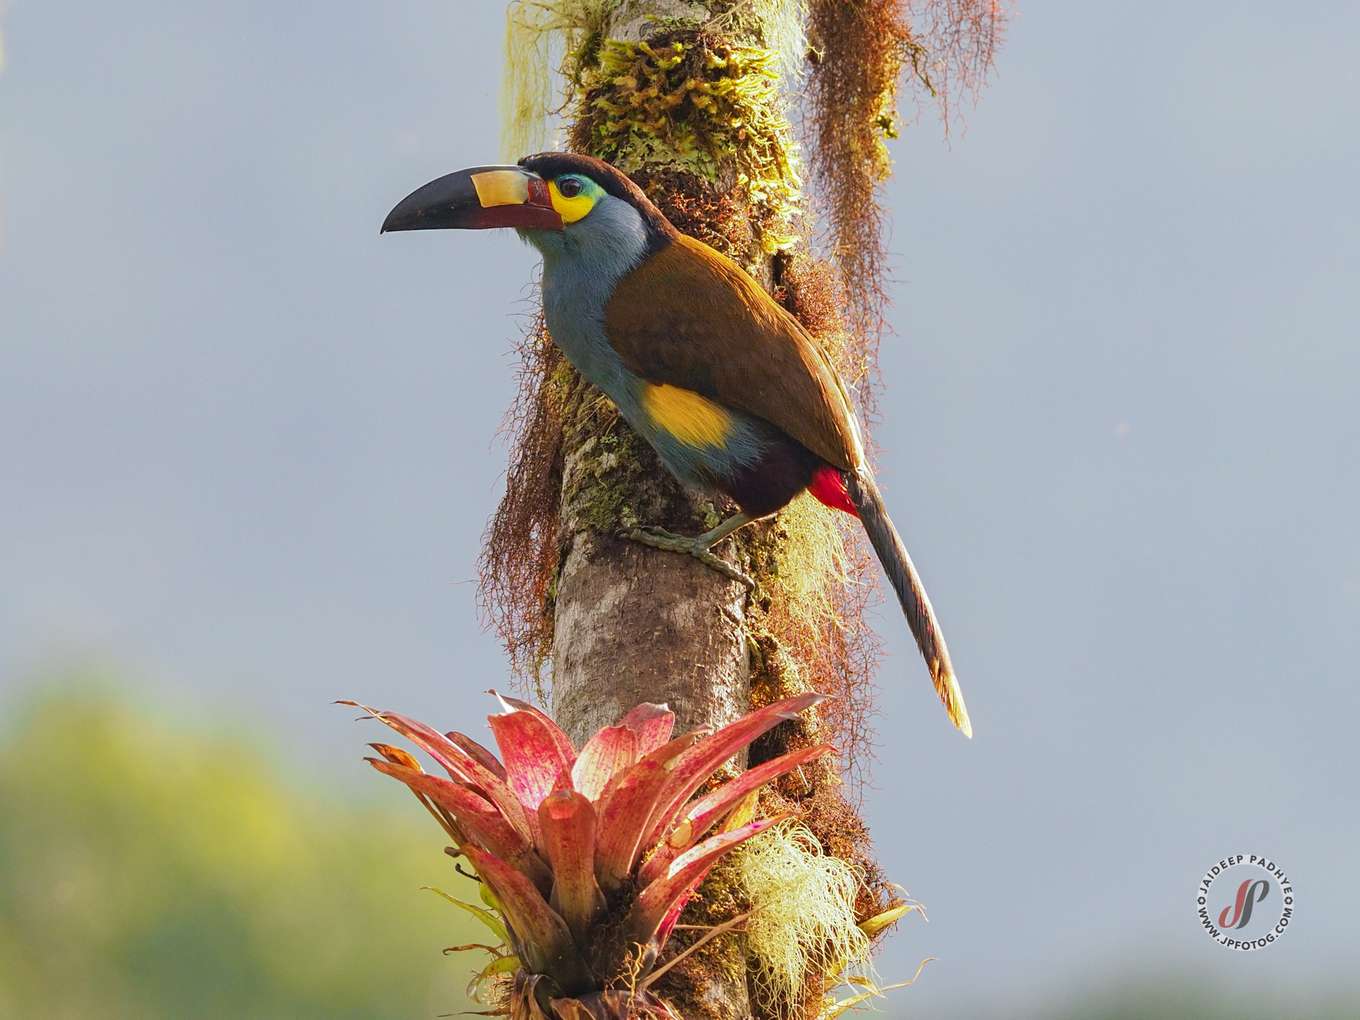 Plate-billed mountain toucan 